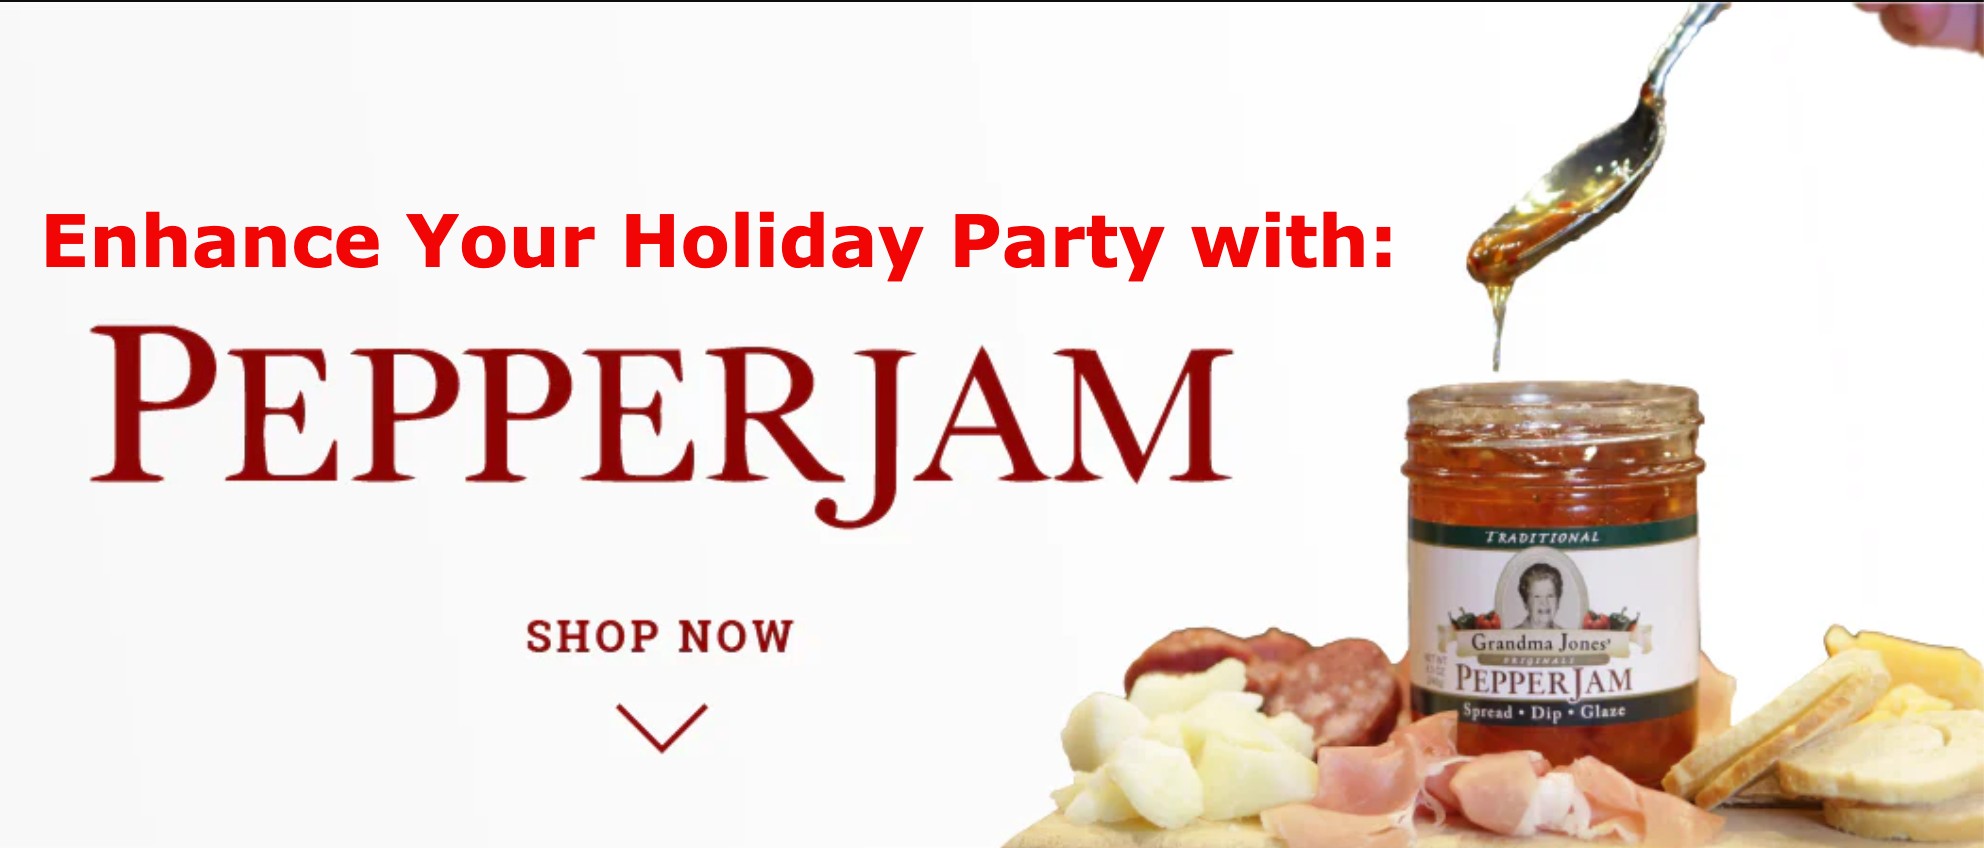 Pepper Jelly: The Perfect Holiday Party Companion